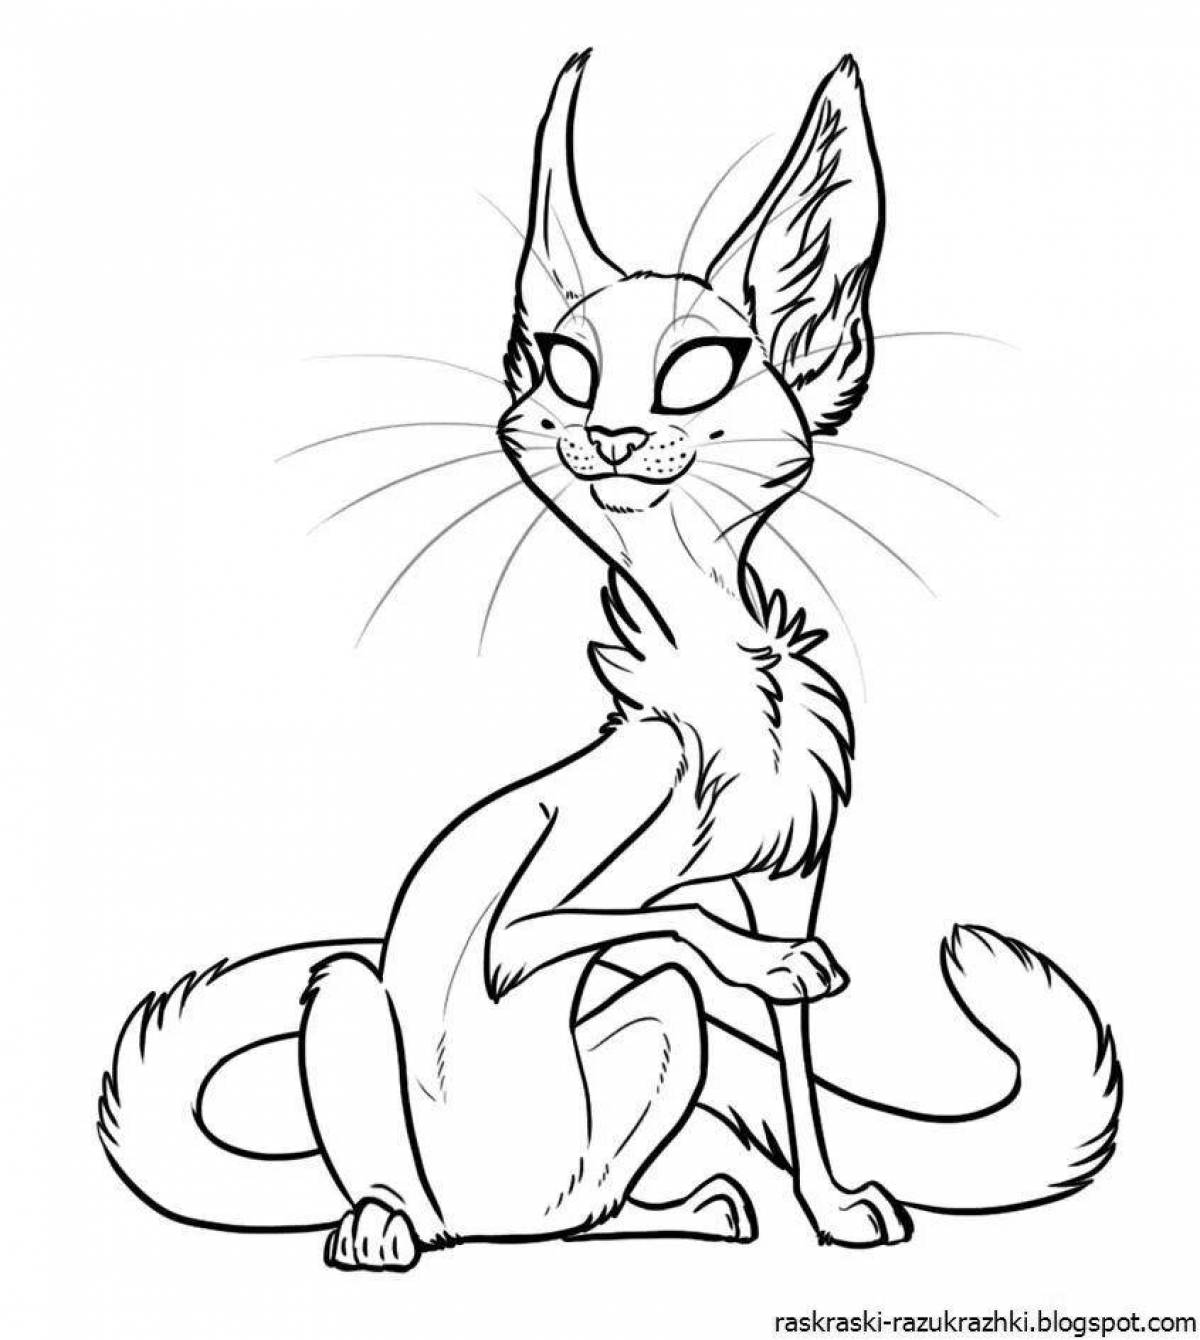 Charming warrior cats coloring book